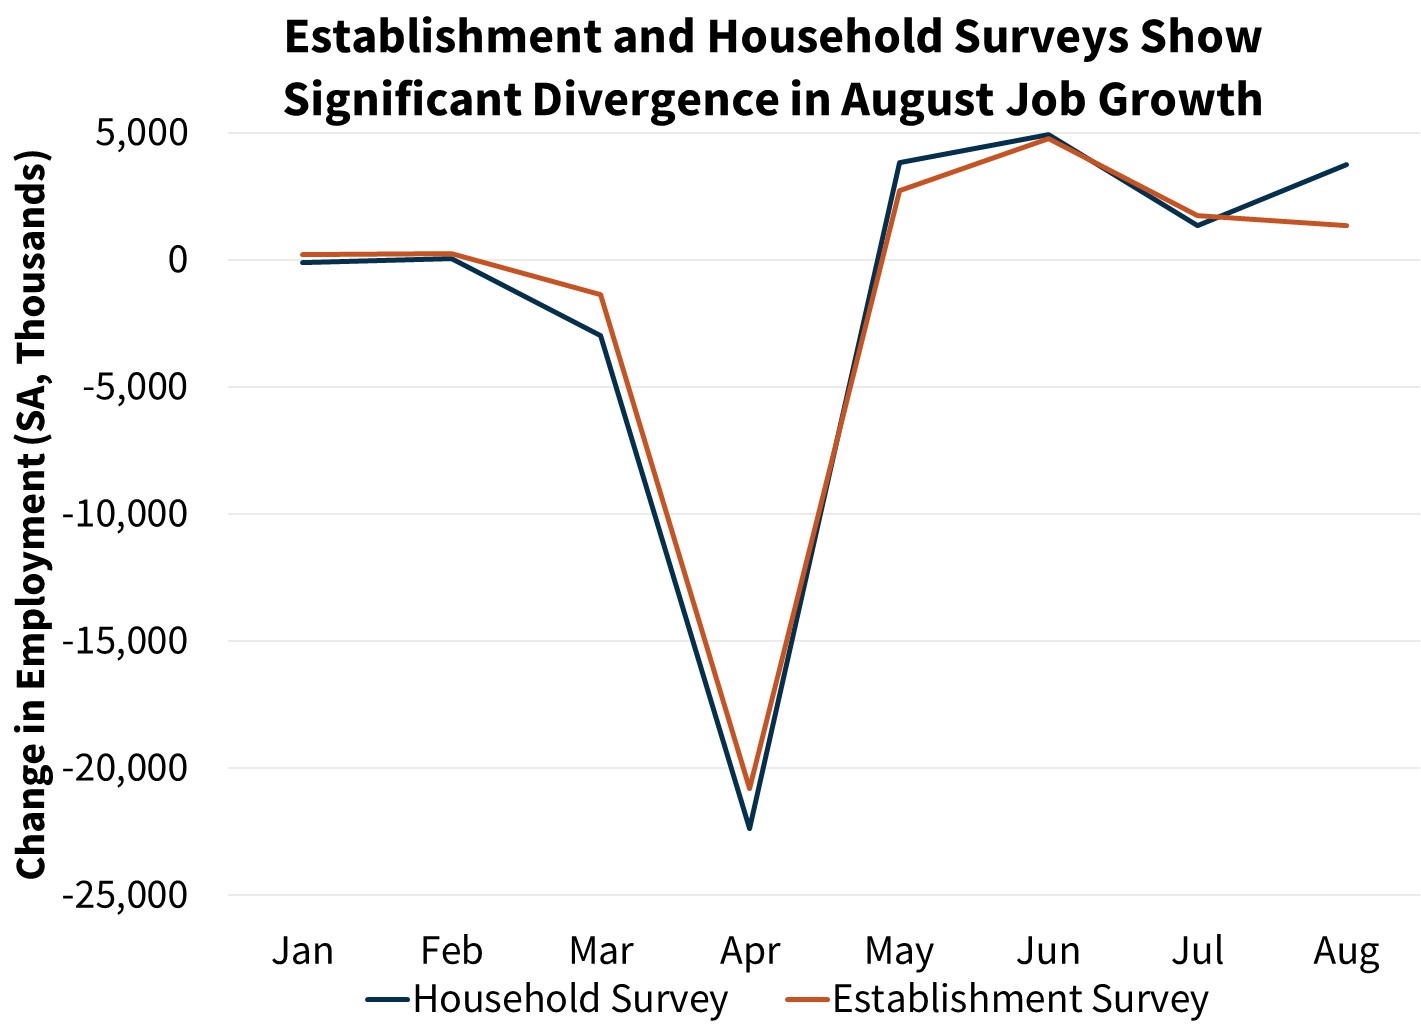  Establishment and Household Surveys Show Significant Divergence in August Job Growth 